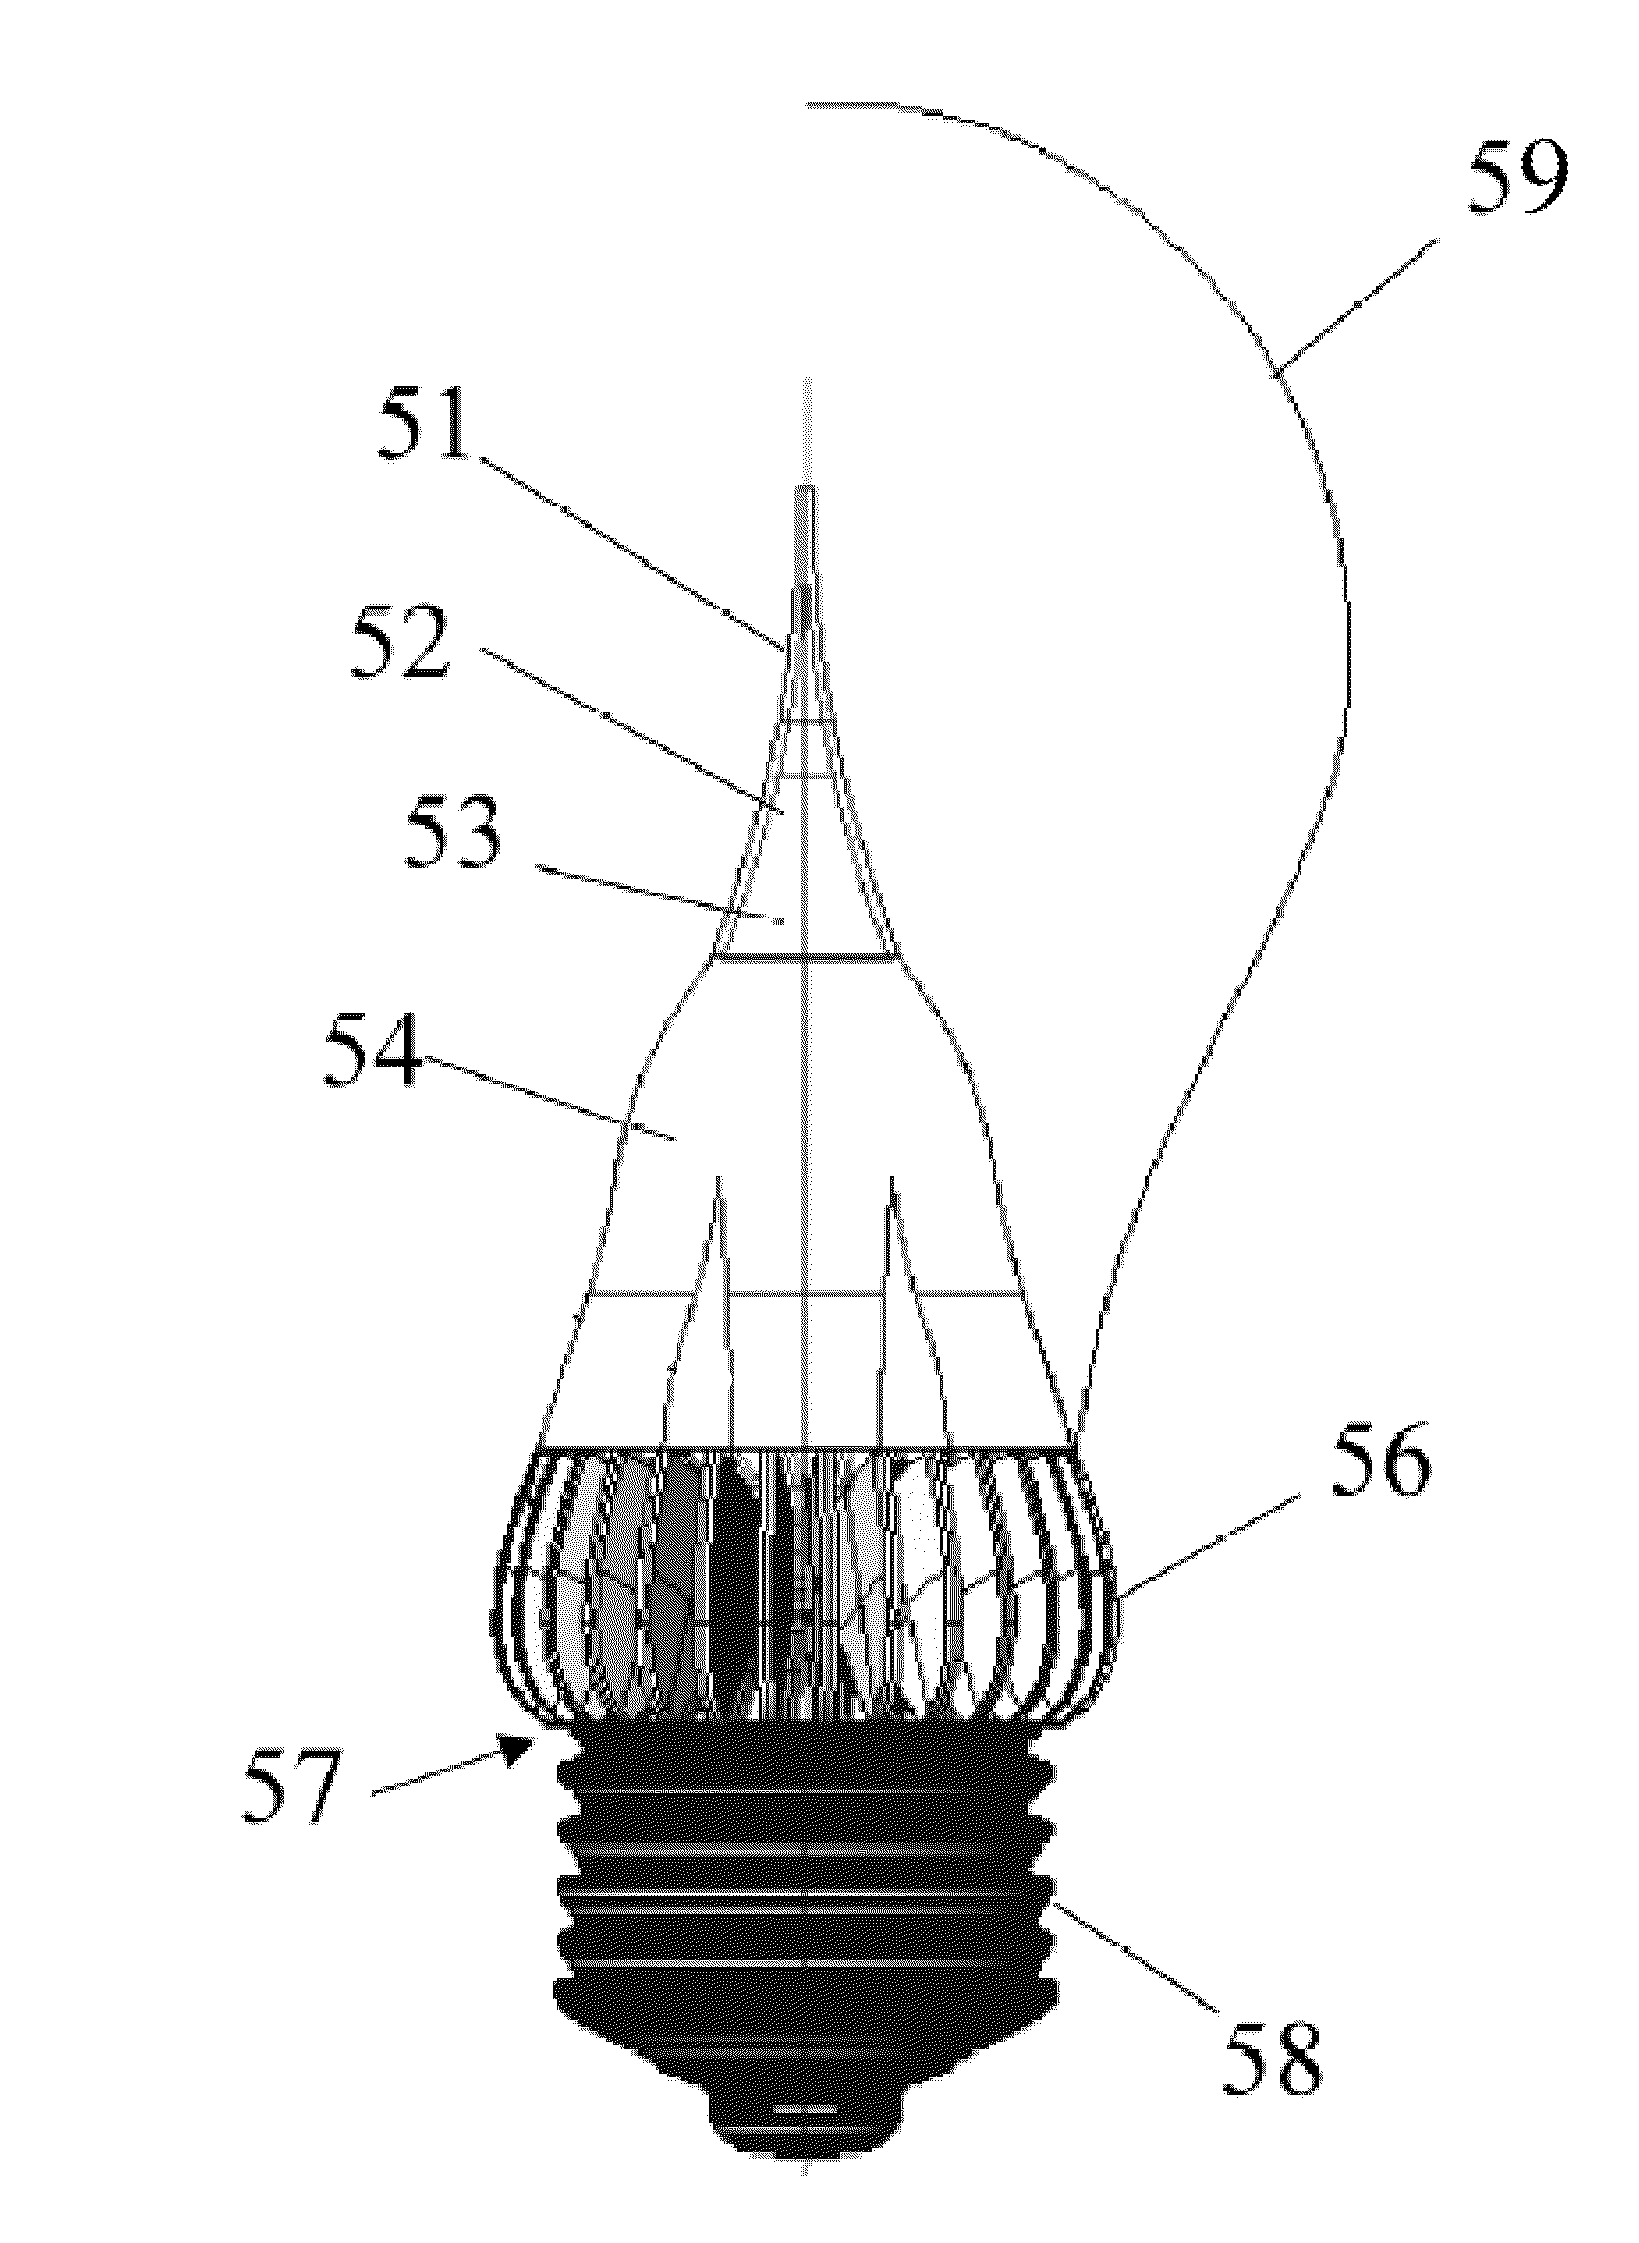 Solid-state luminescent filament lamps